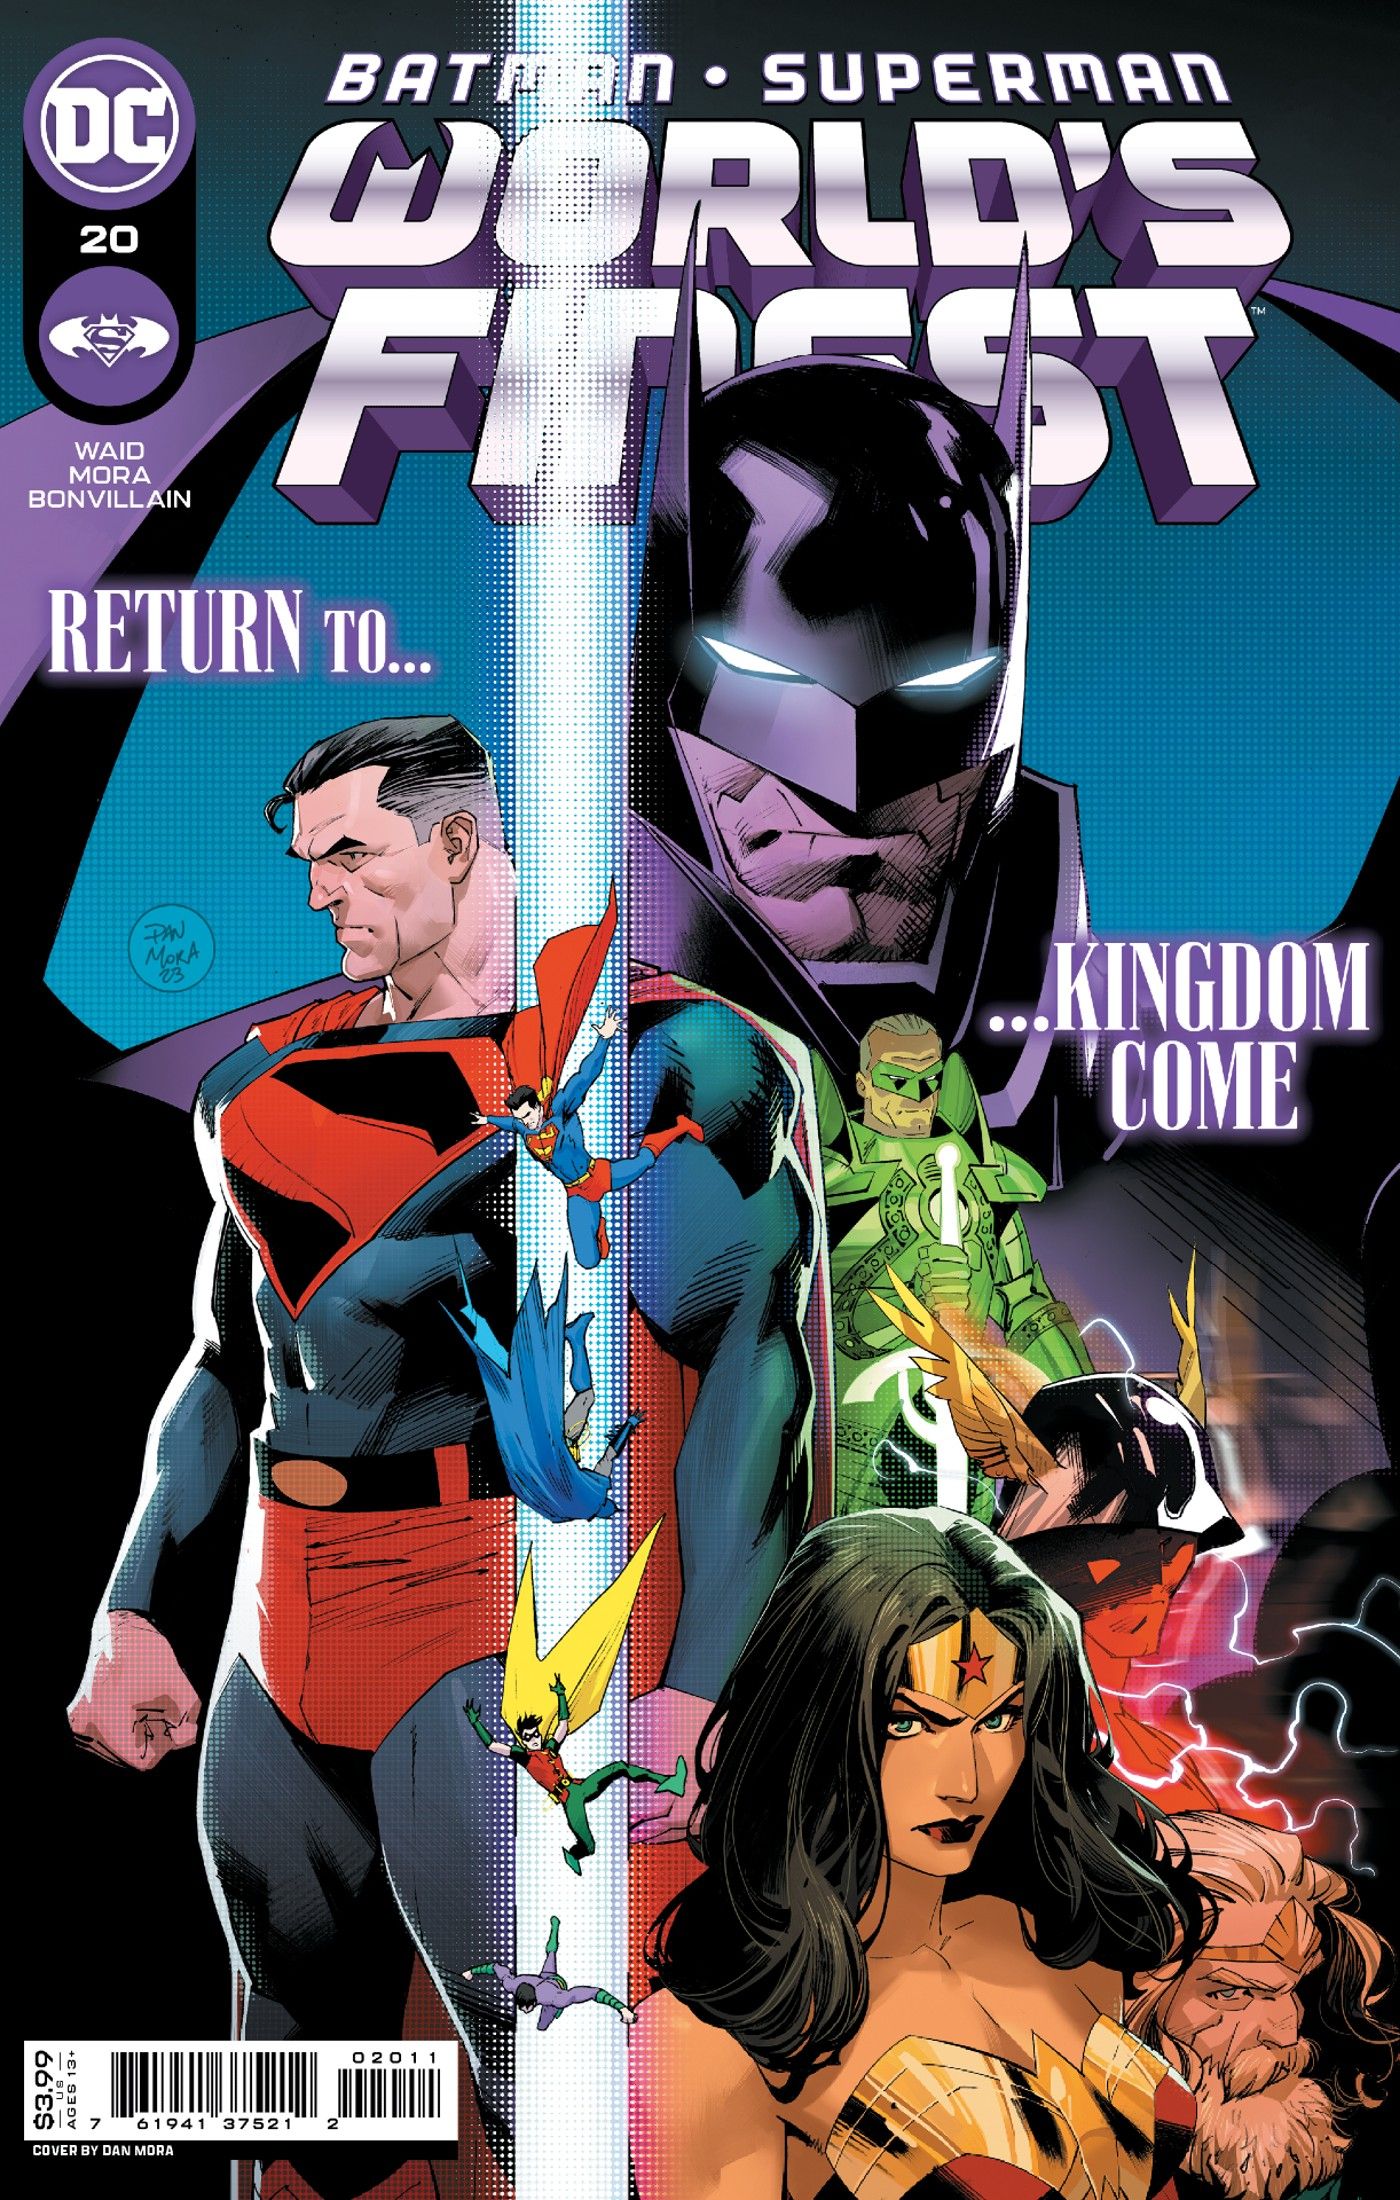 “Heir to the Kingdom”: Batman & Superman Travel to the Kingdom Come Universe in Official Prequel